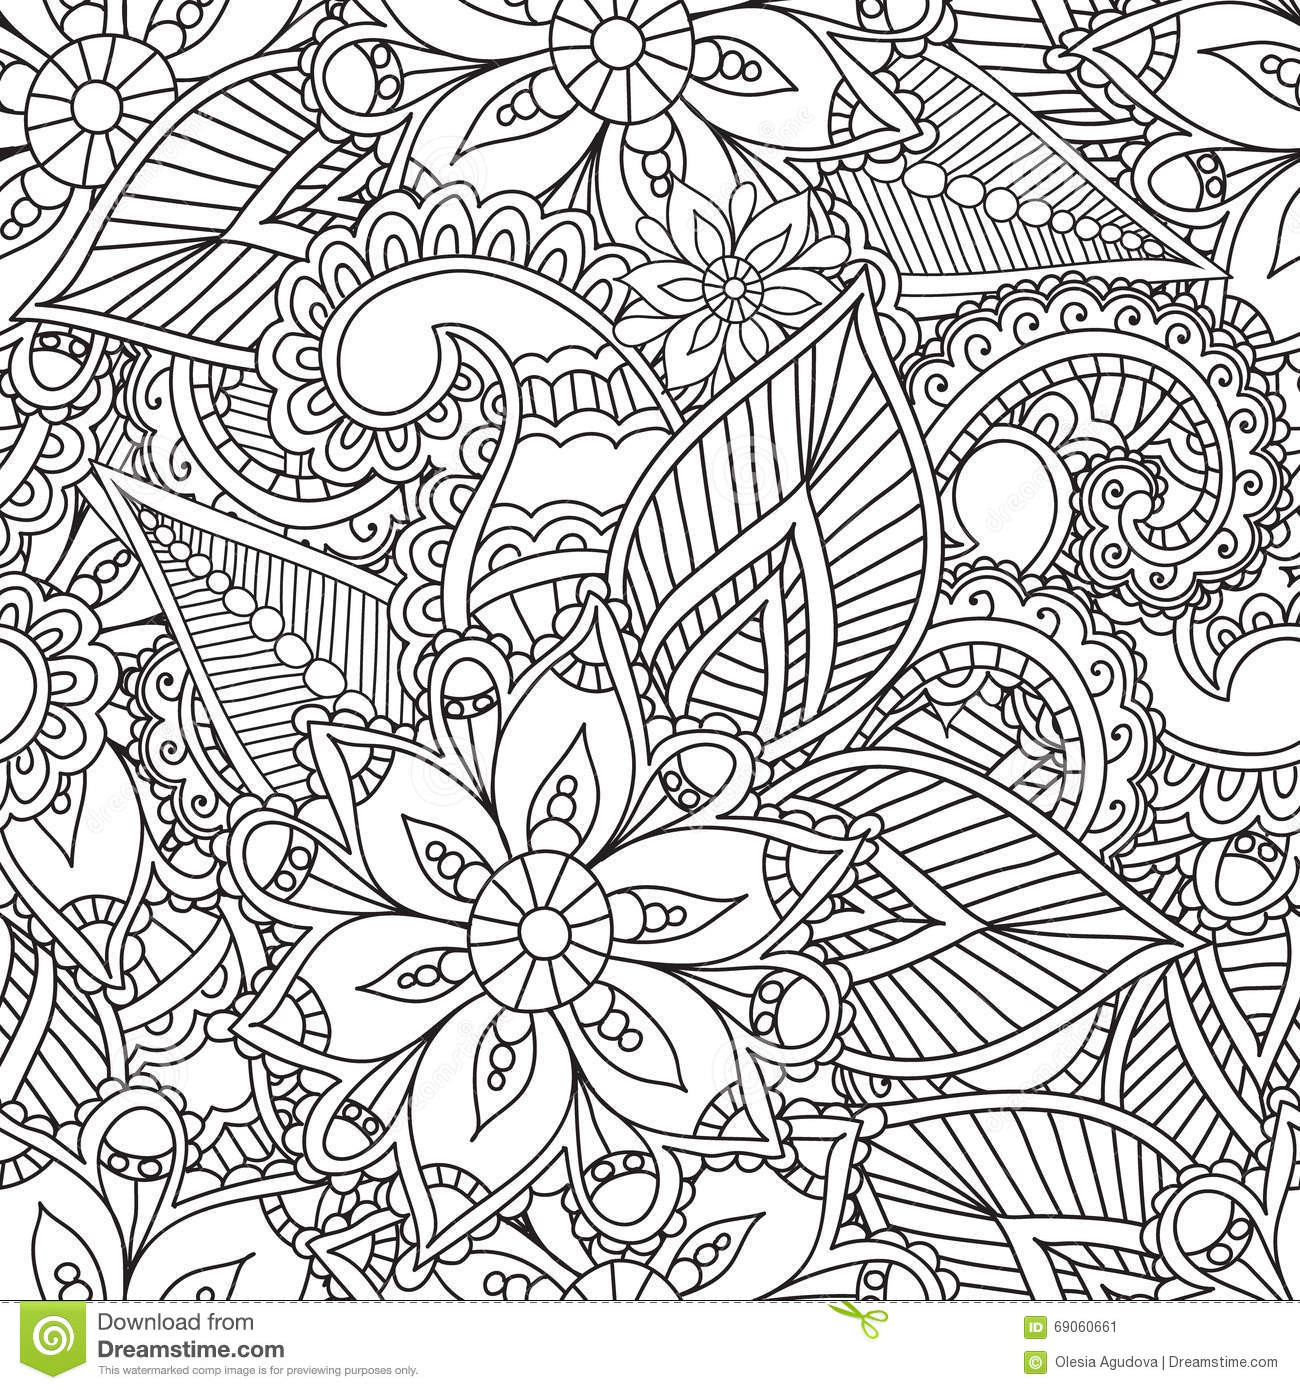 Printable Abstract Coloring Pages For Adults
 Abstract Coloring Pages For Adults – Color Bros